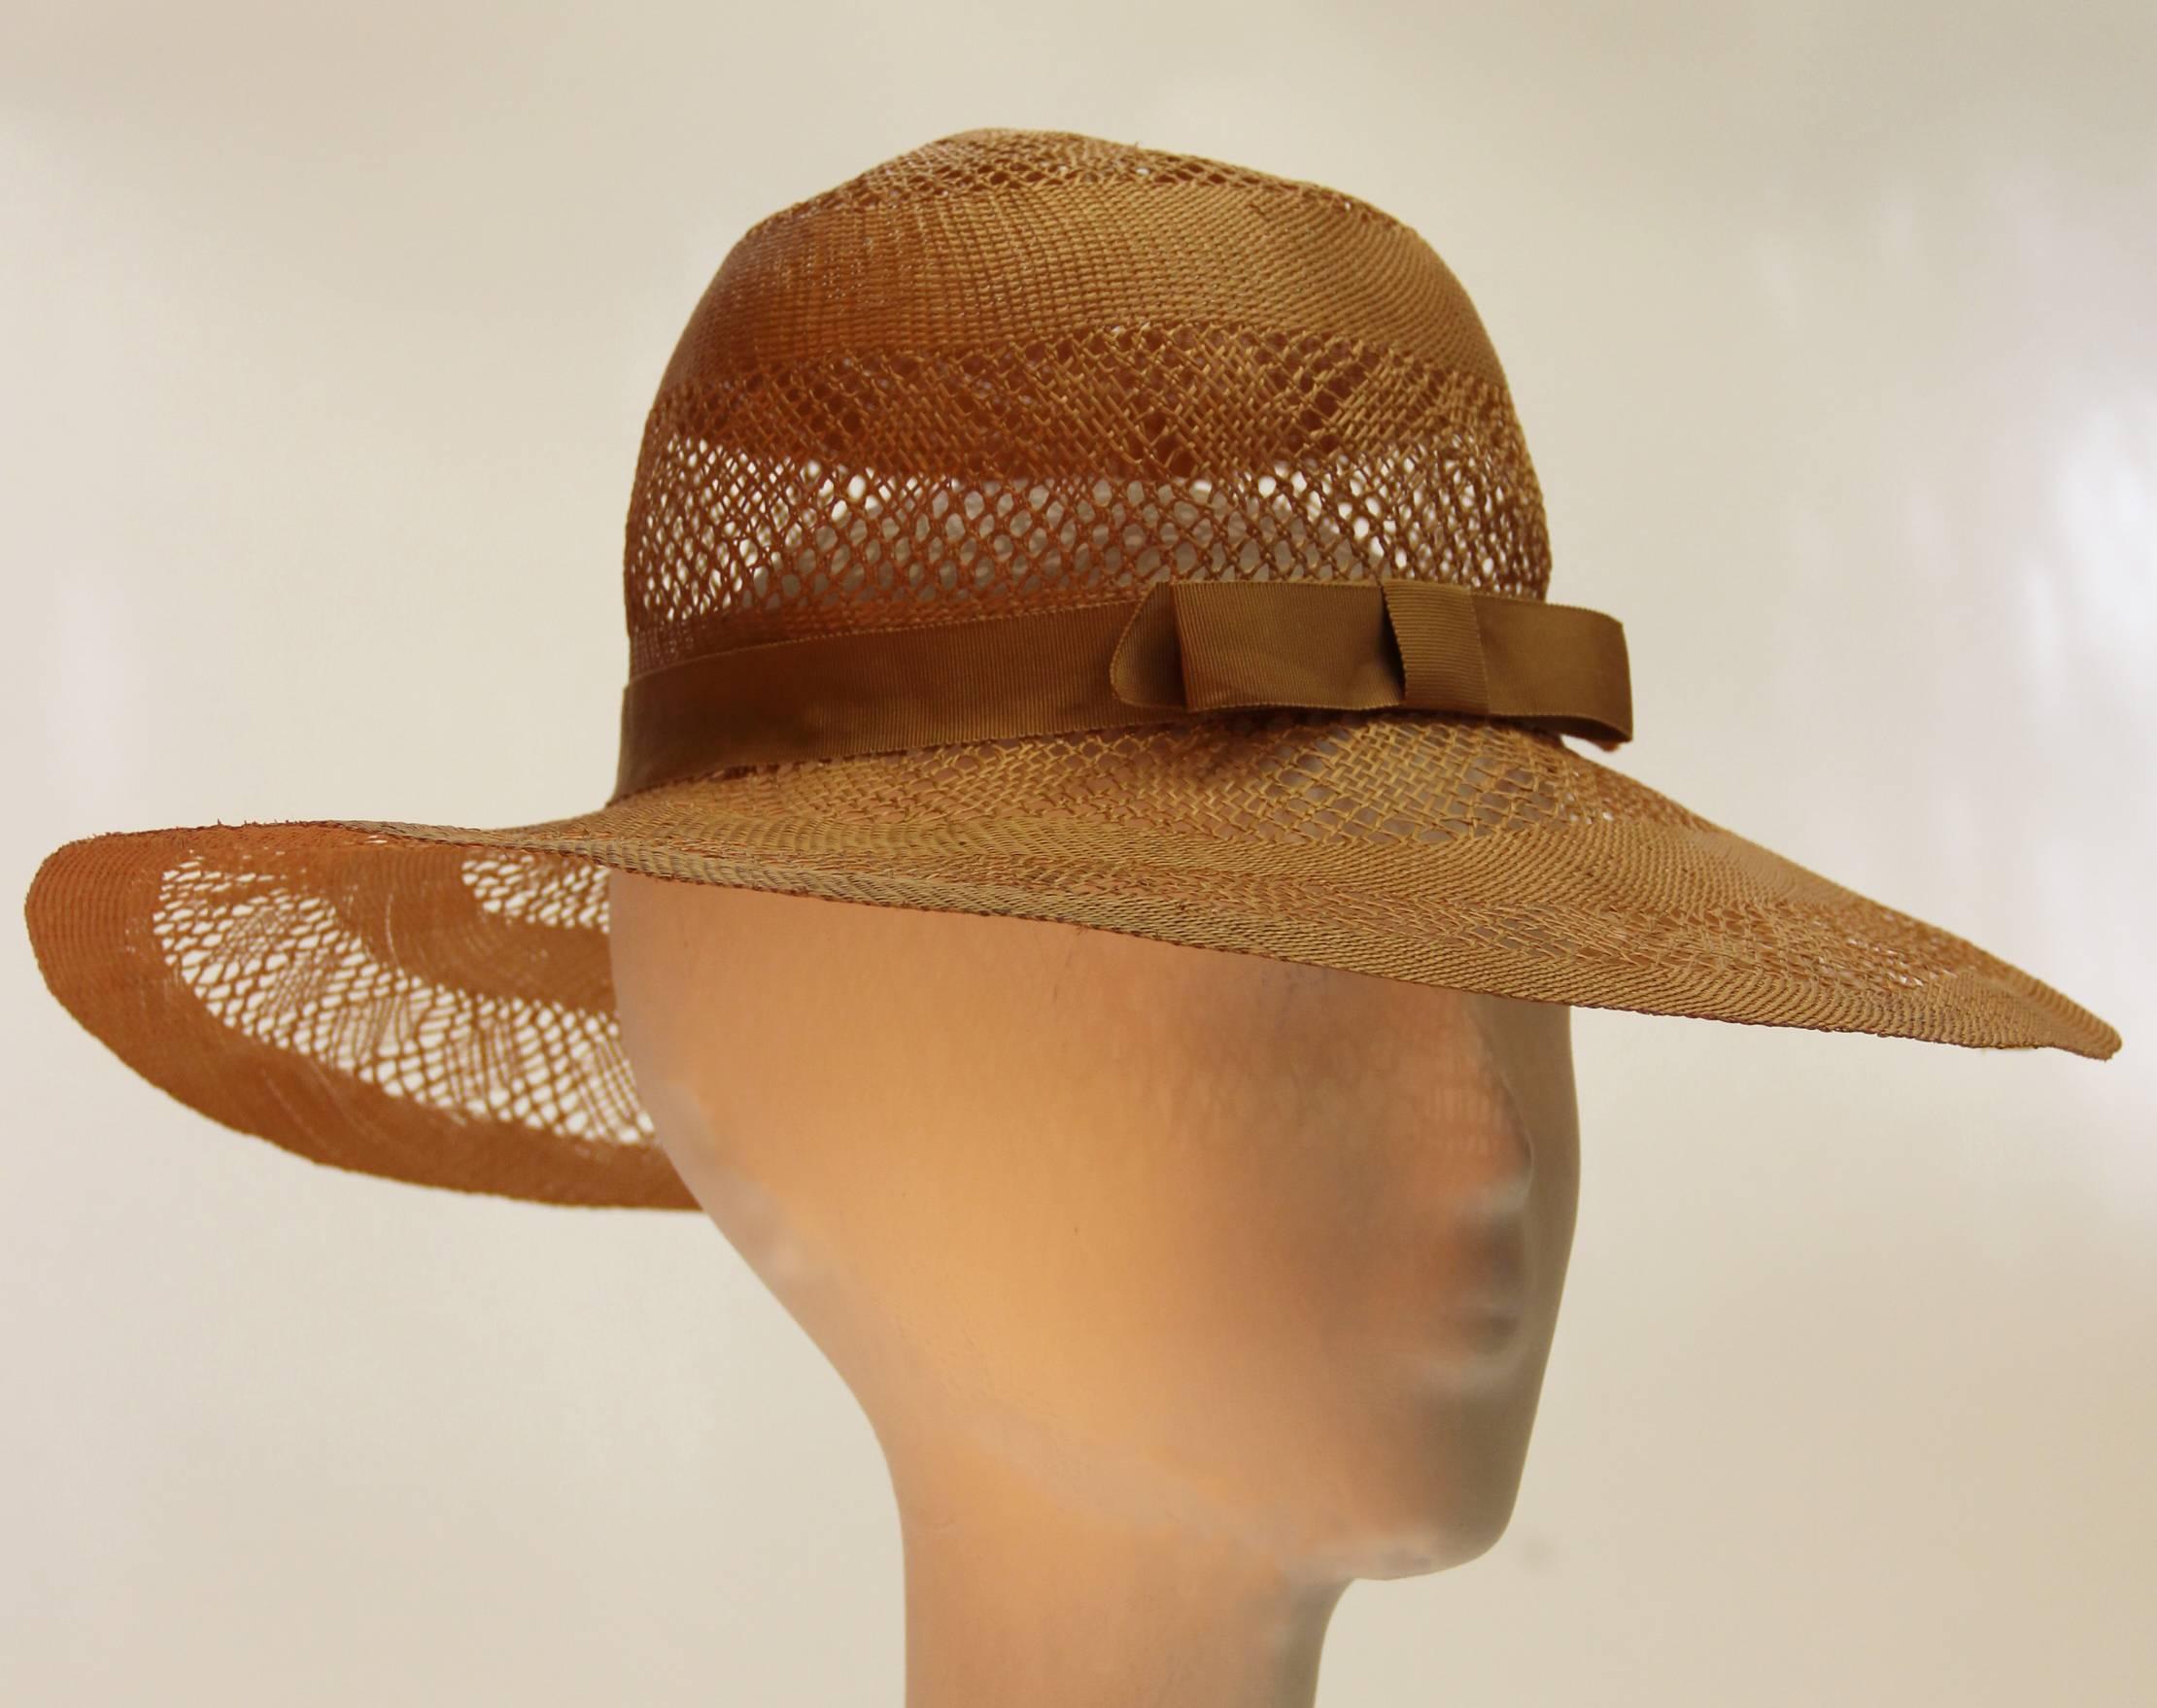 1970's Halston woven straw wide brimmed sun hat. Delicate lace like pattern.Grosgrain ribbon trim with bow. Like new condition. 

Measurement: 21 1/2